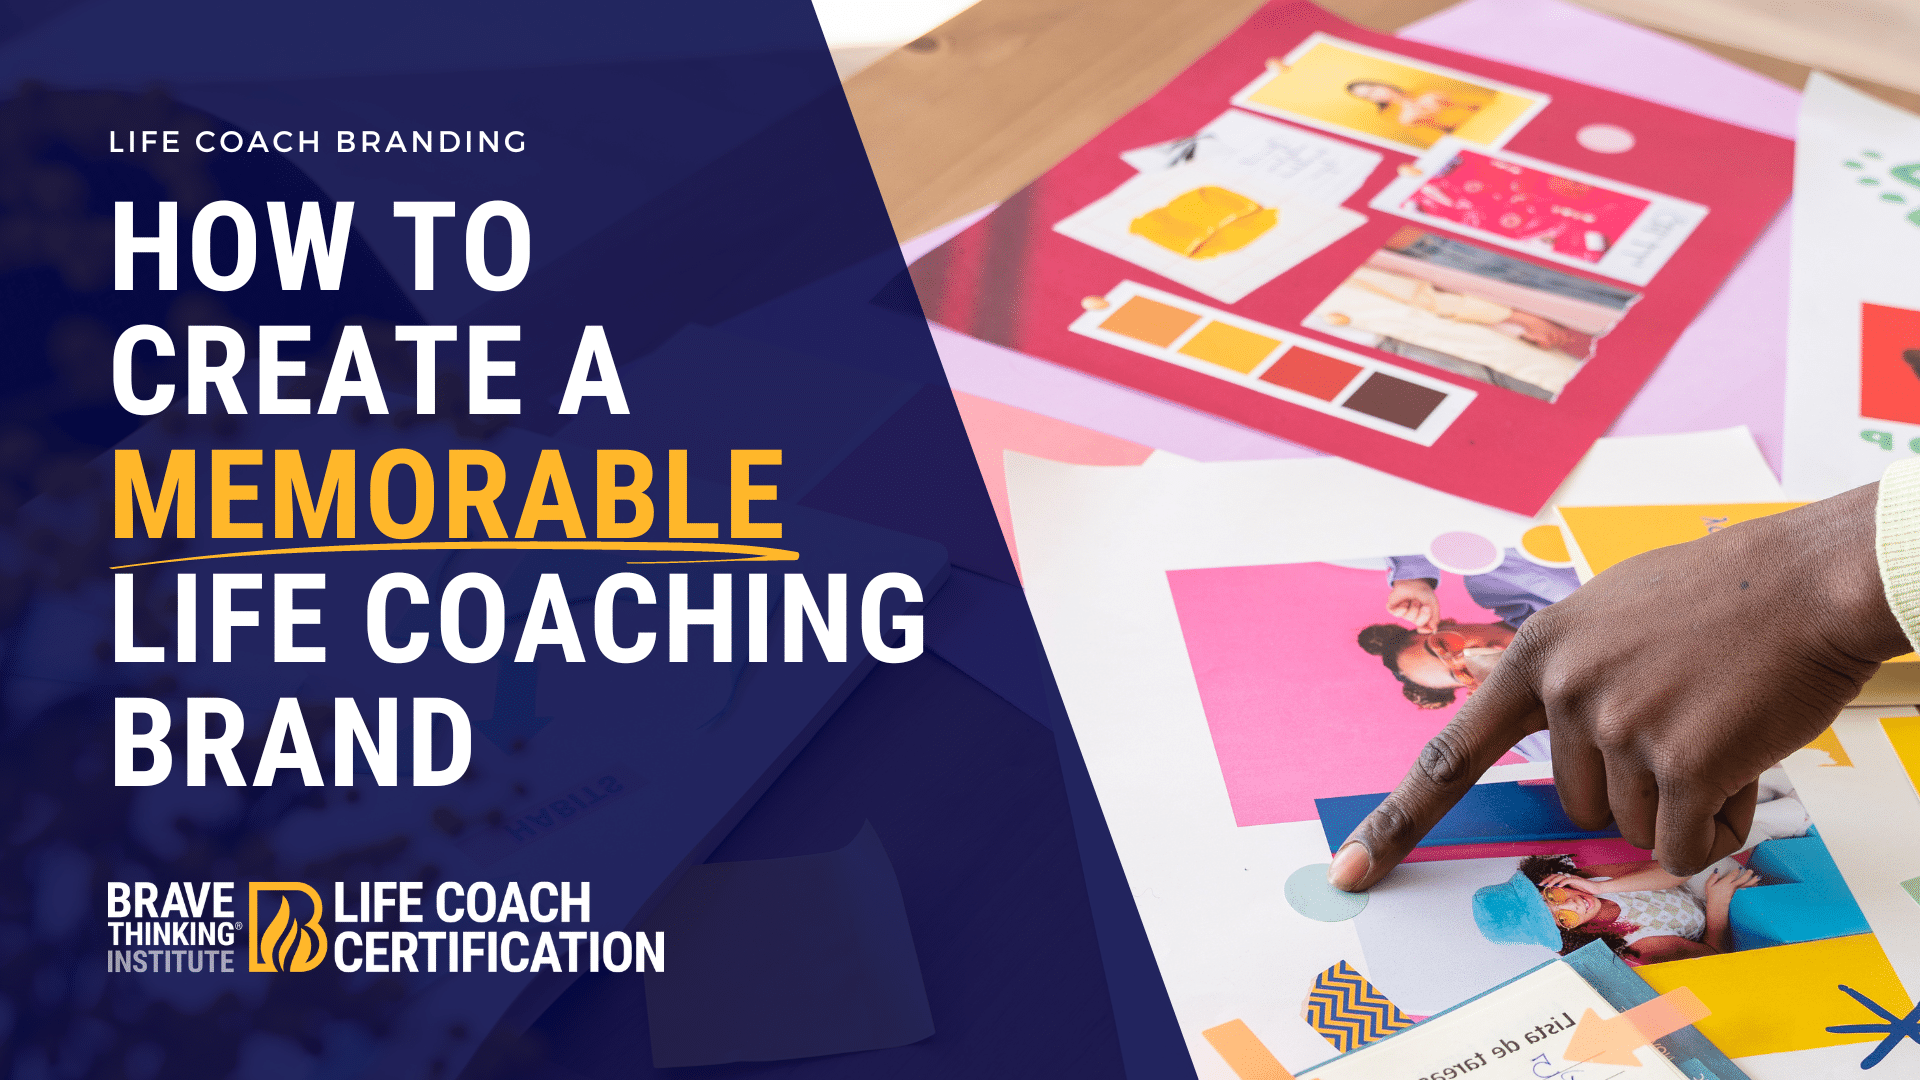 How to create a memorable meaningful life coaching brand